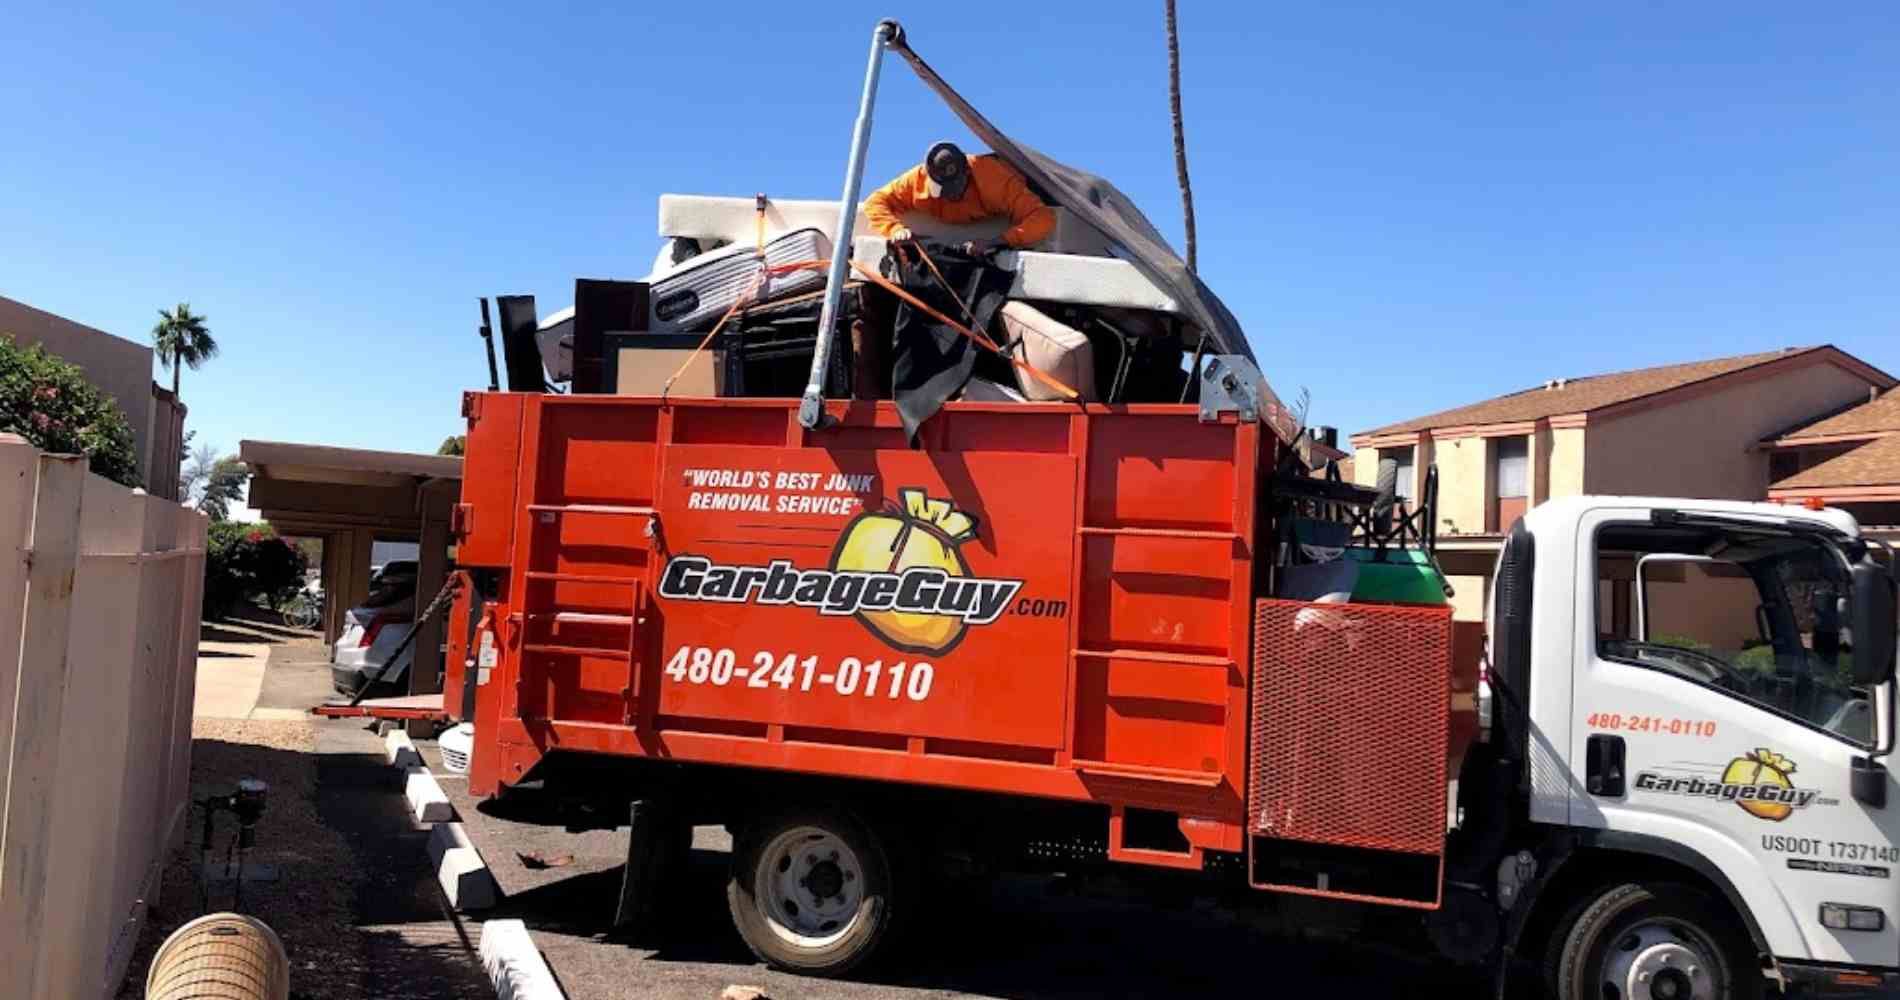 #1 for Furniture Removal in Queen Creek, AZ With Over 1200 5-Star Reviews!